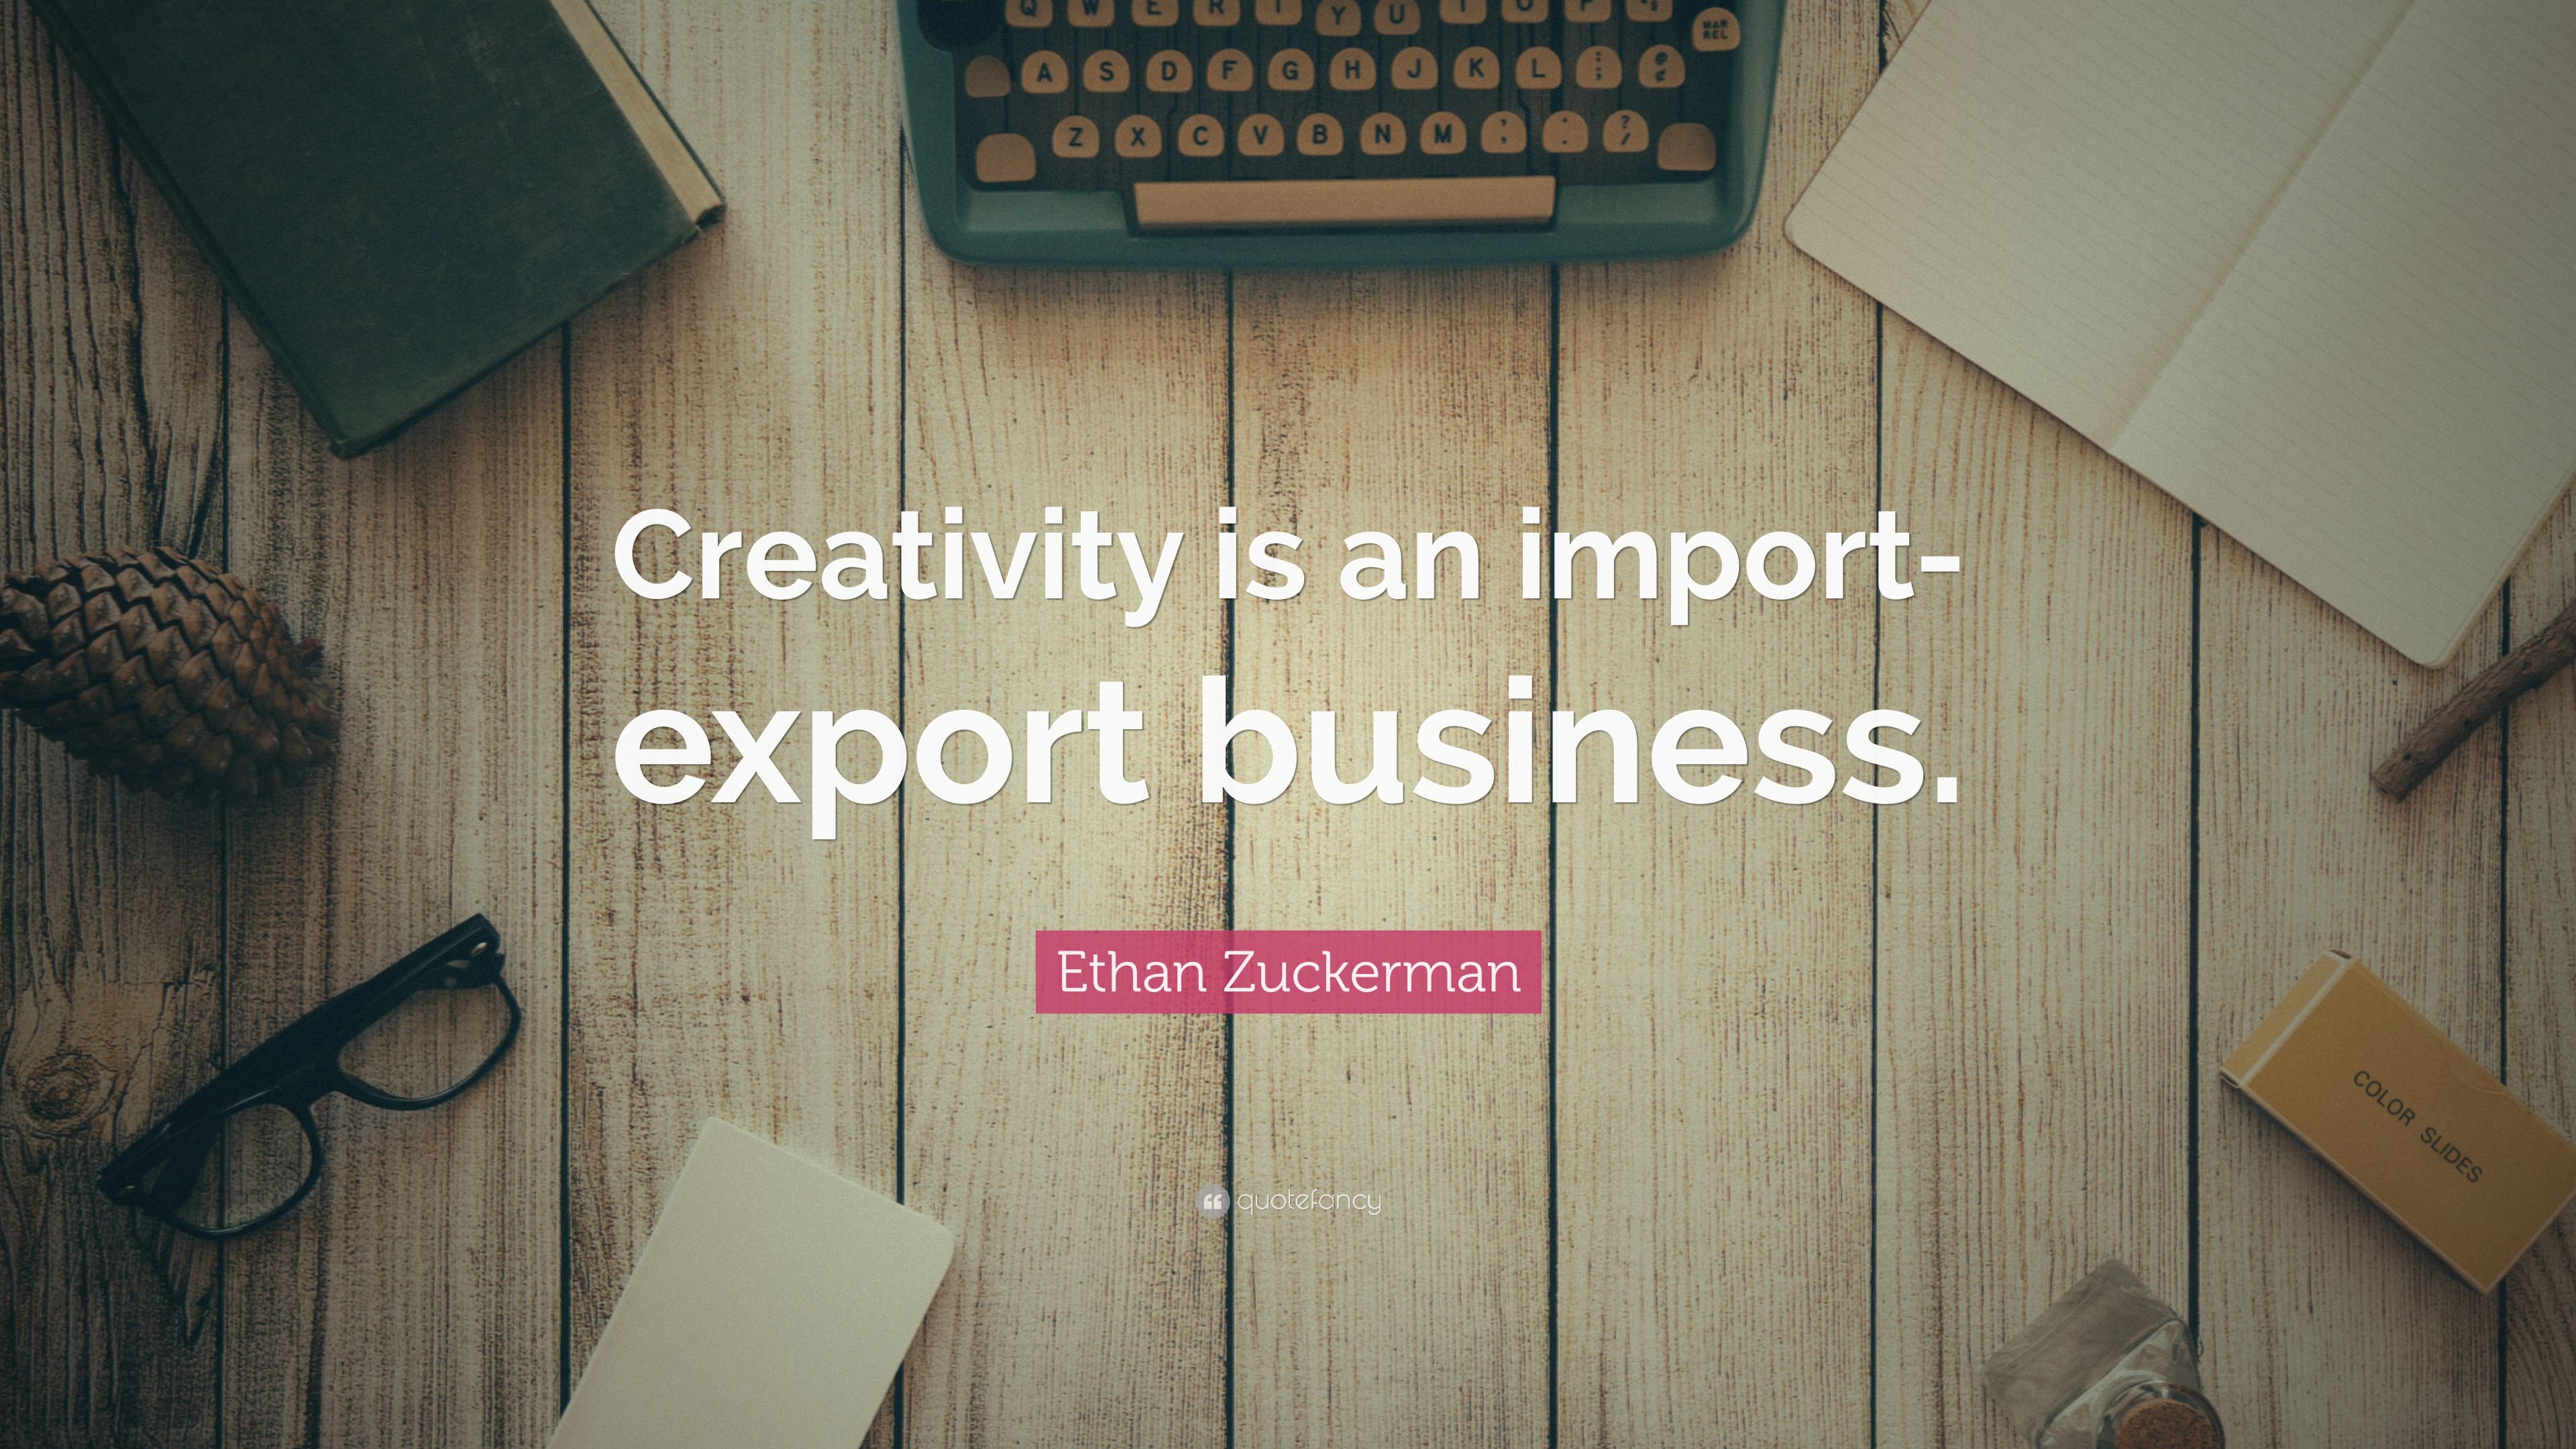 Ethan Zuckerman Quote: “Creativity Is An Import Export Business.”